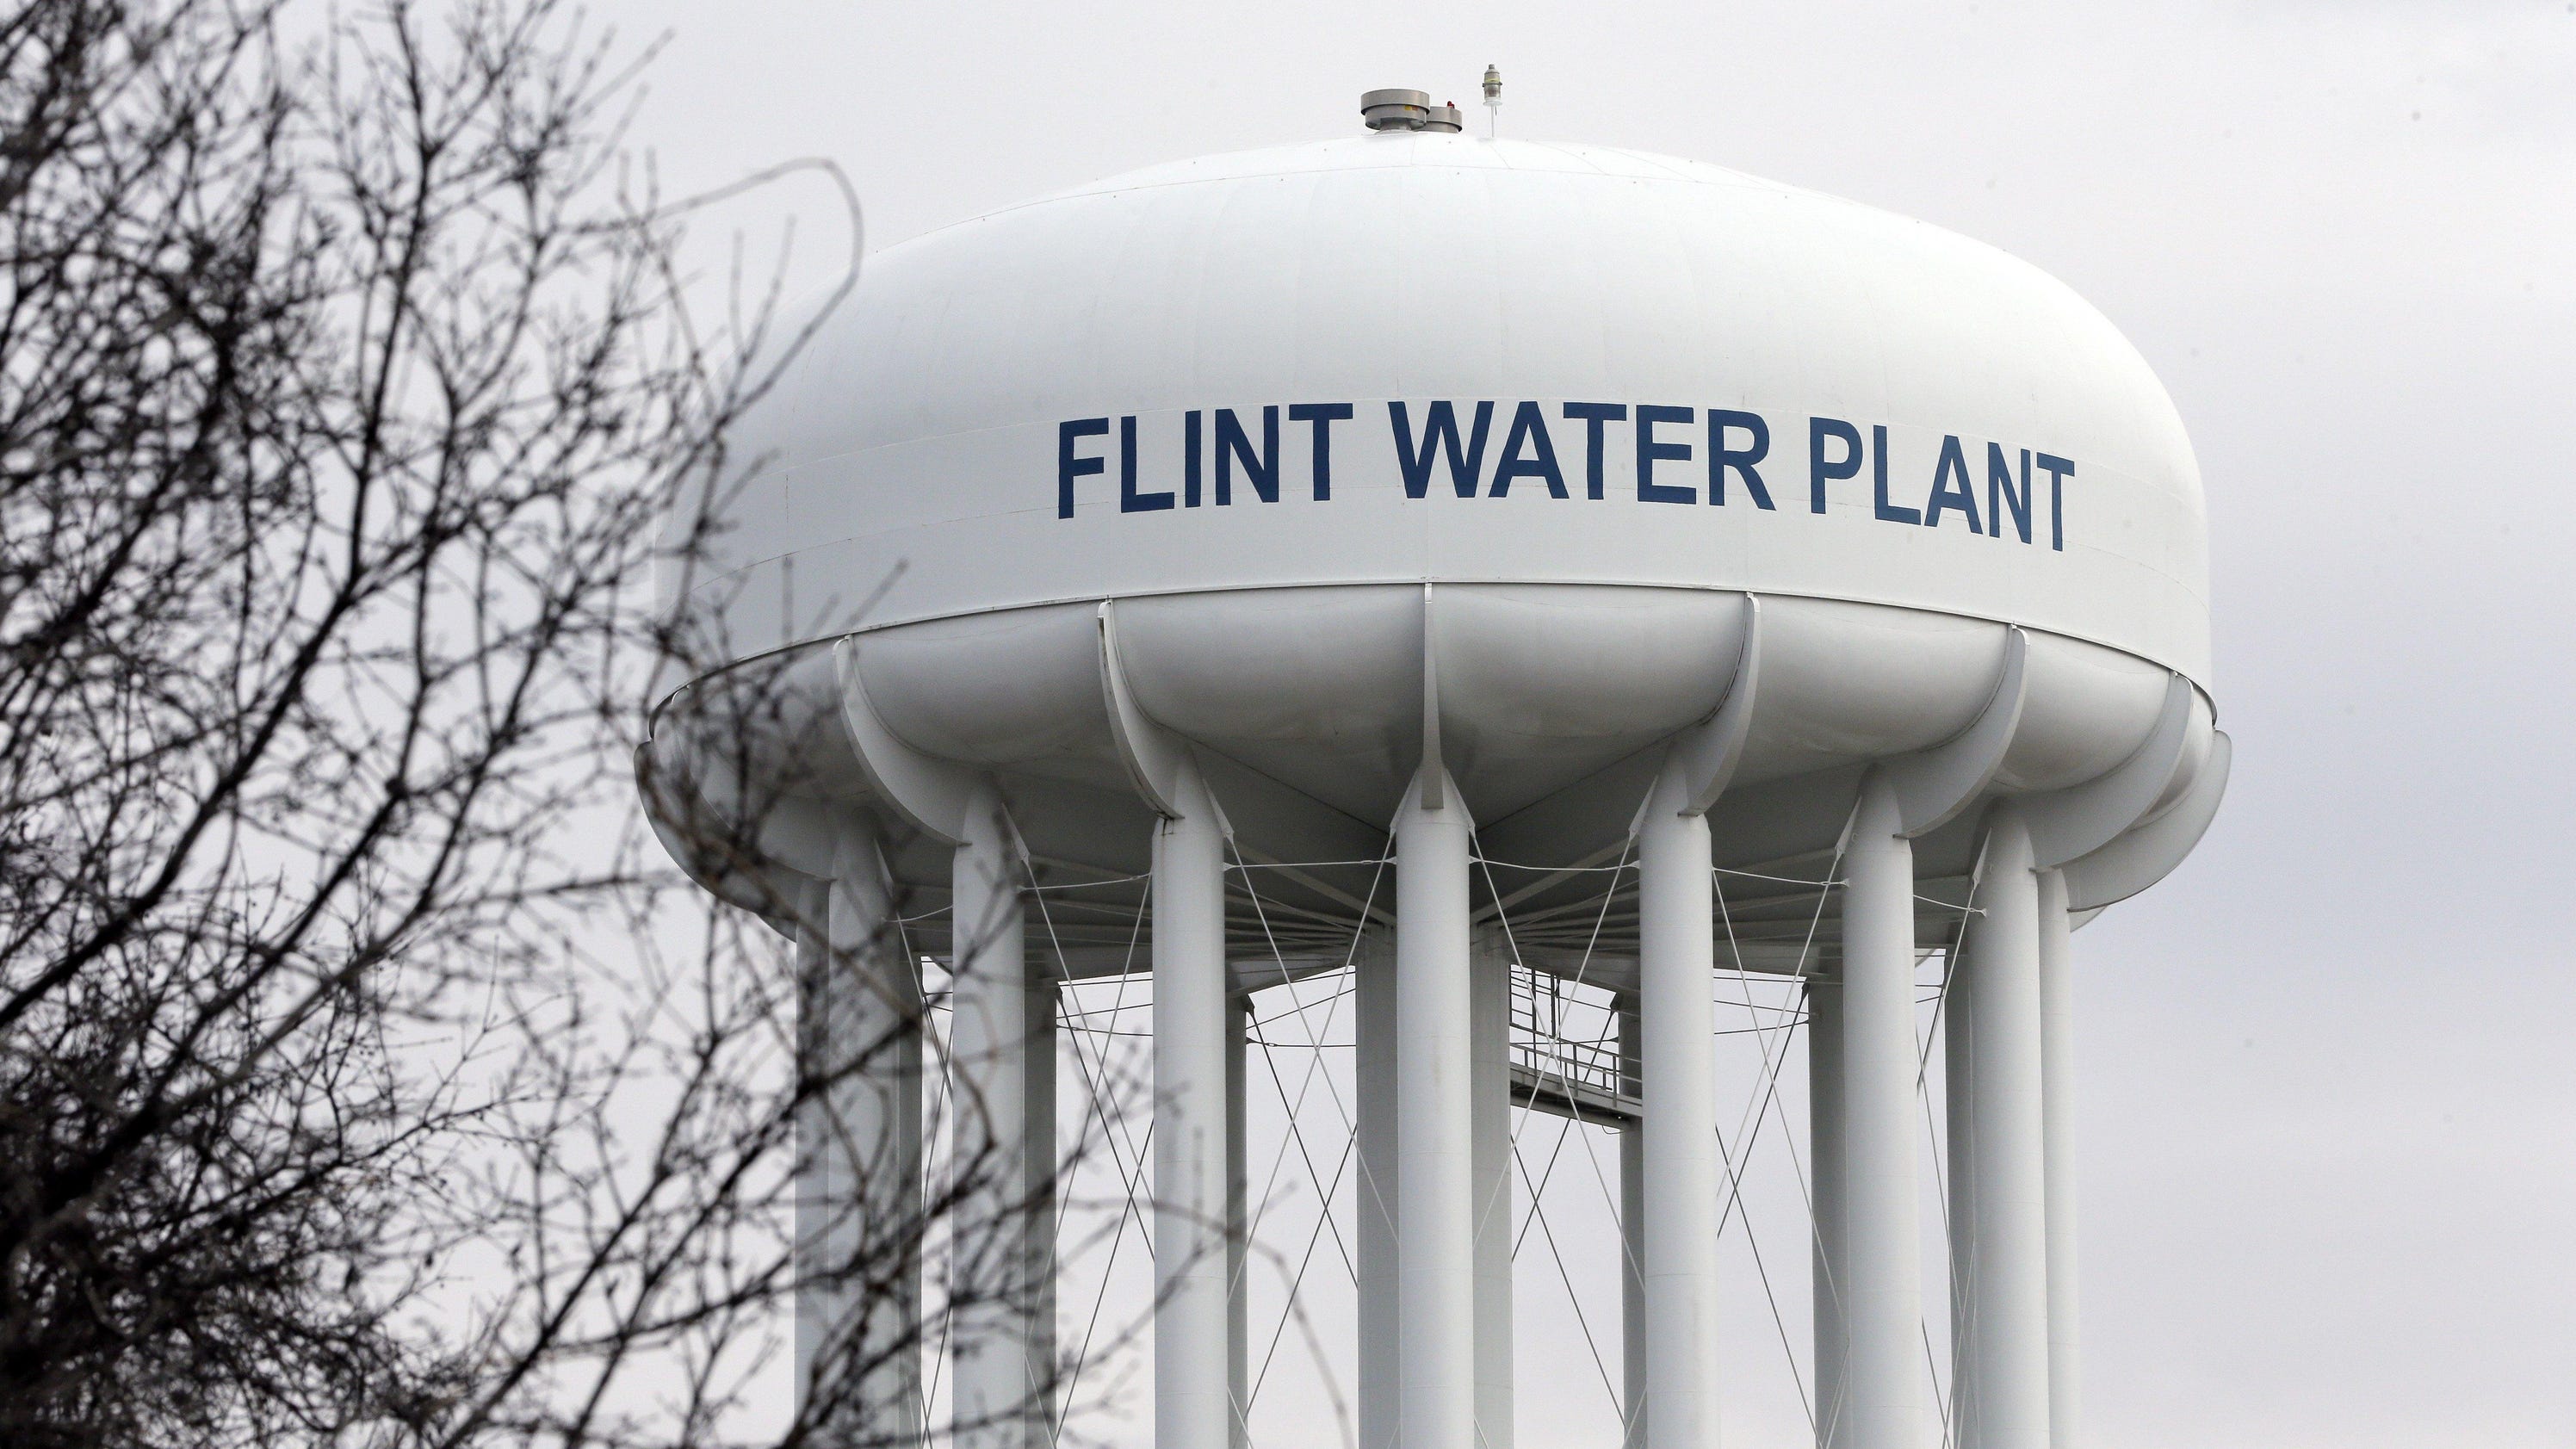 Emails show contractor was worried about Flint’s water - The Detroit News